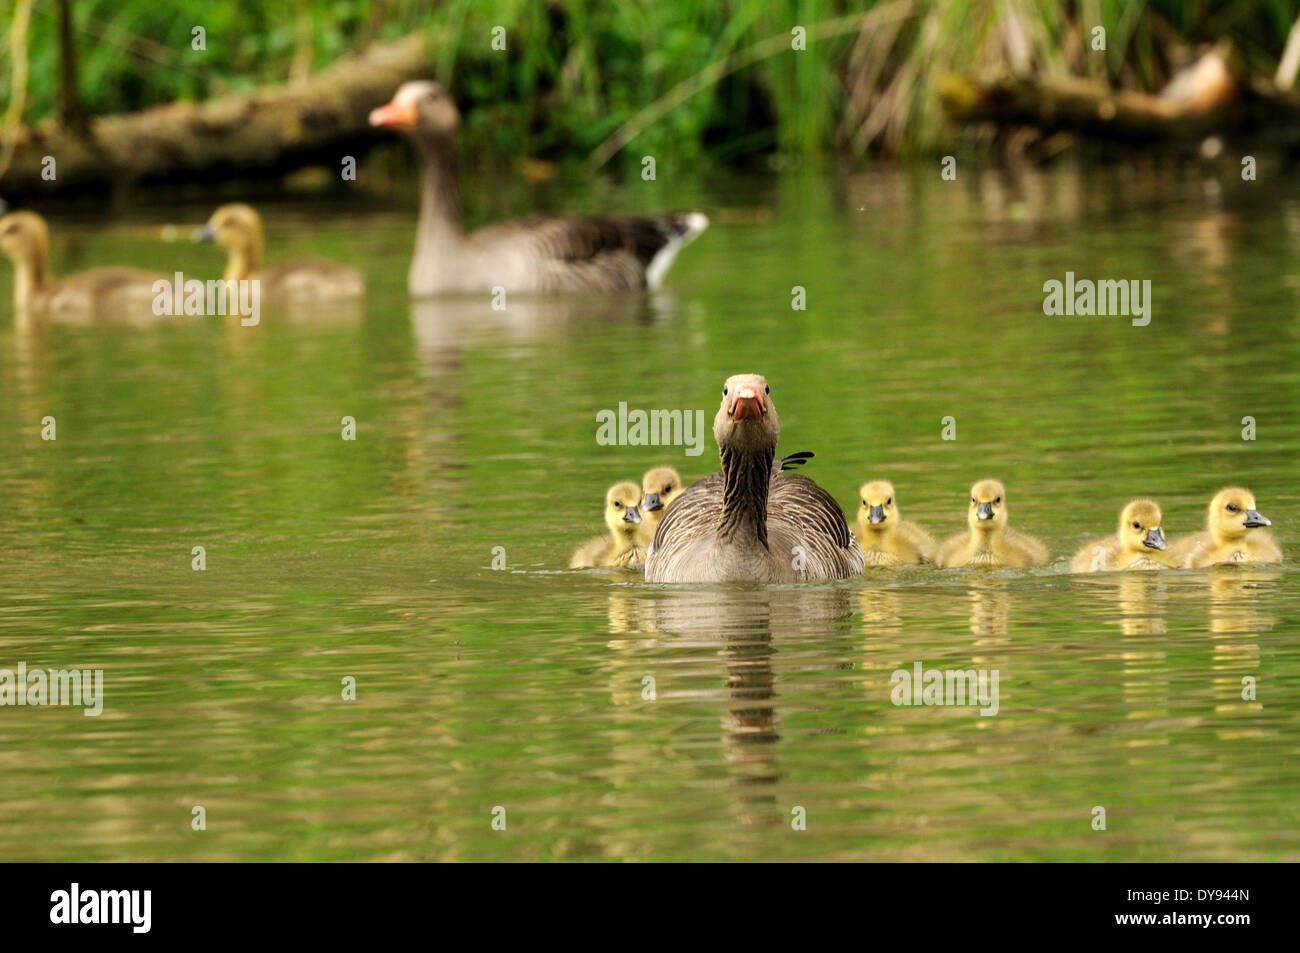 Greylag goose wild goose geese goose water bird water birds wild geese Anser anser greylag geese young fledglings waters anima Stock Photo